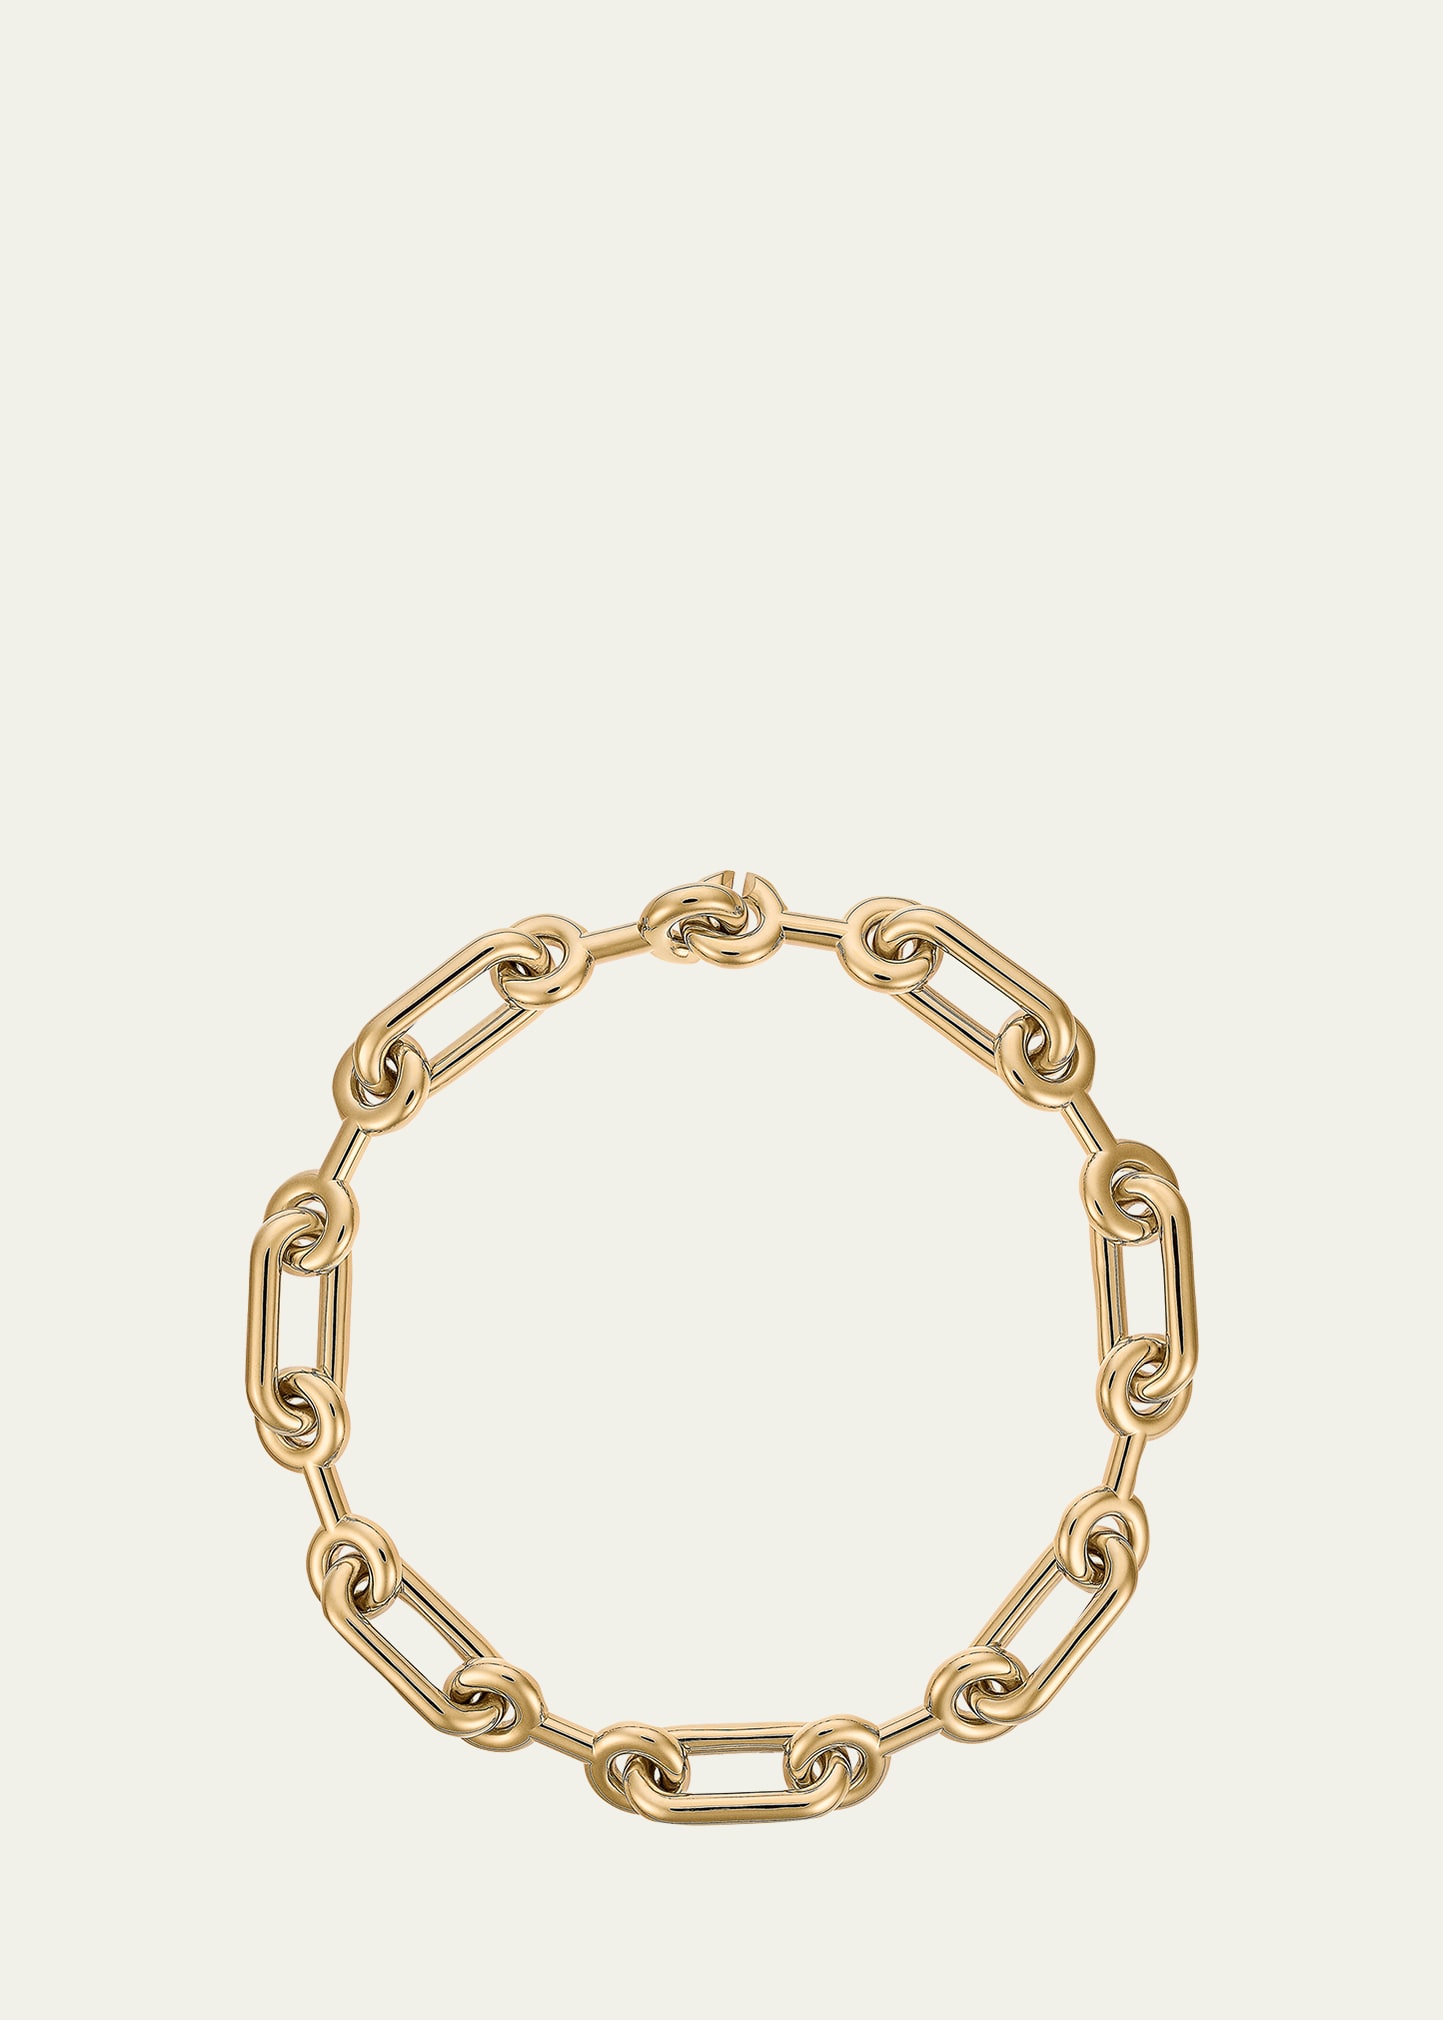 Maxi Binary Chain Necklace in Gold Vermeil